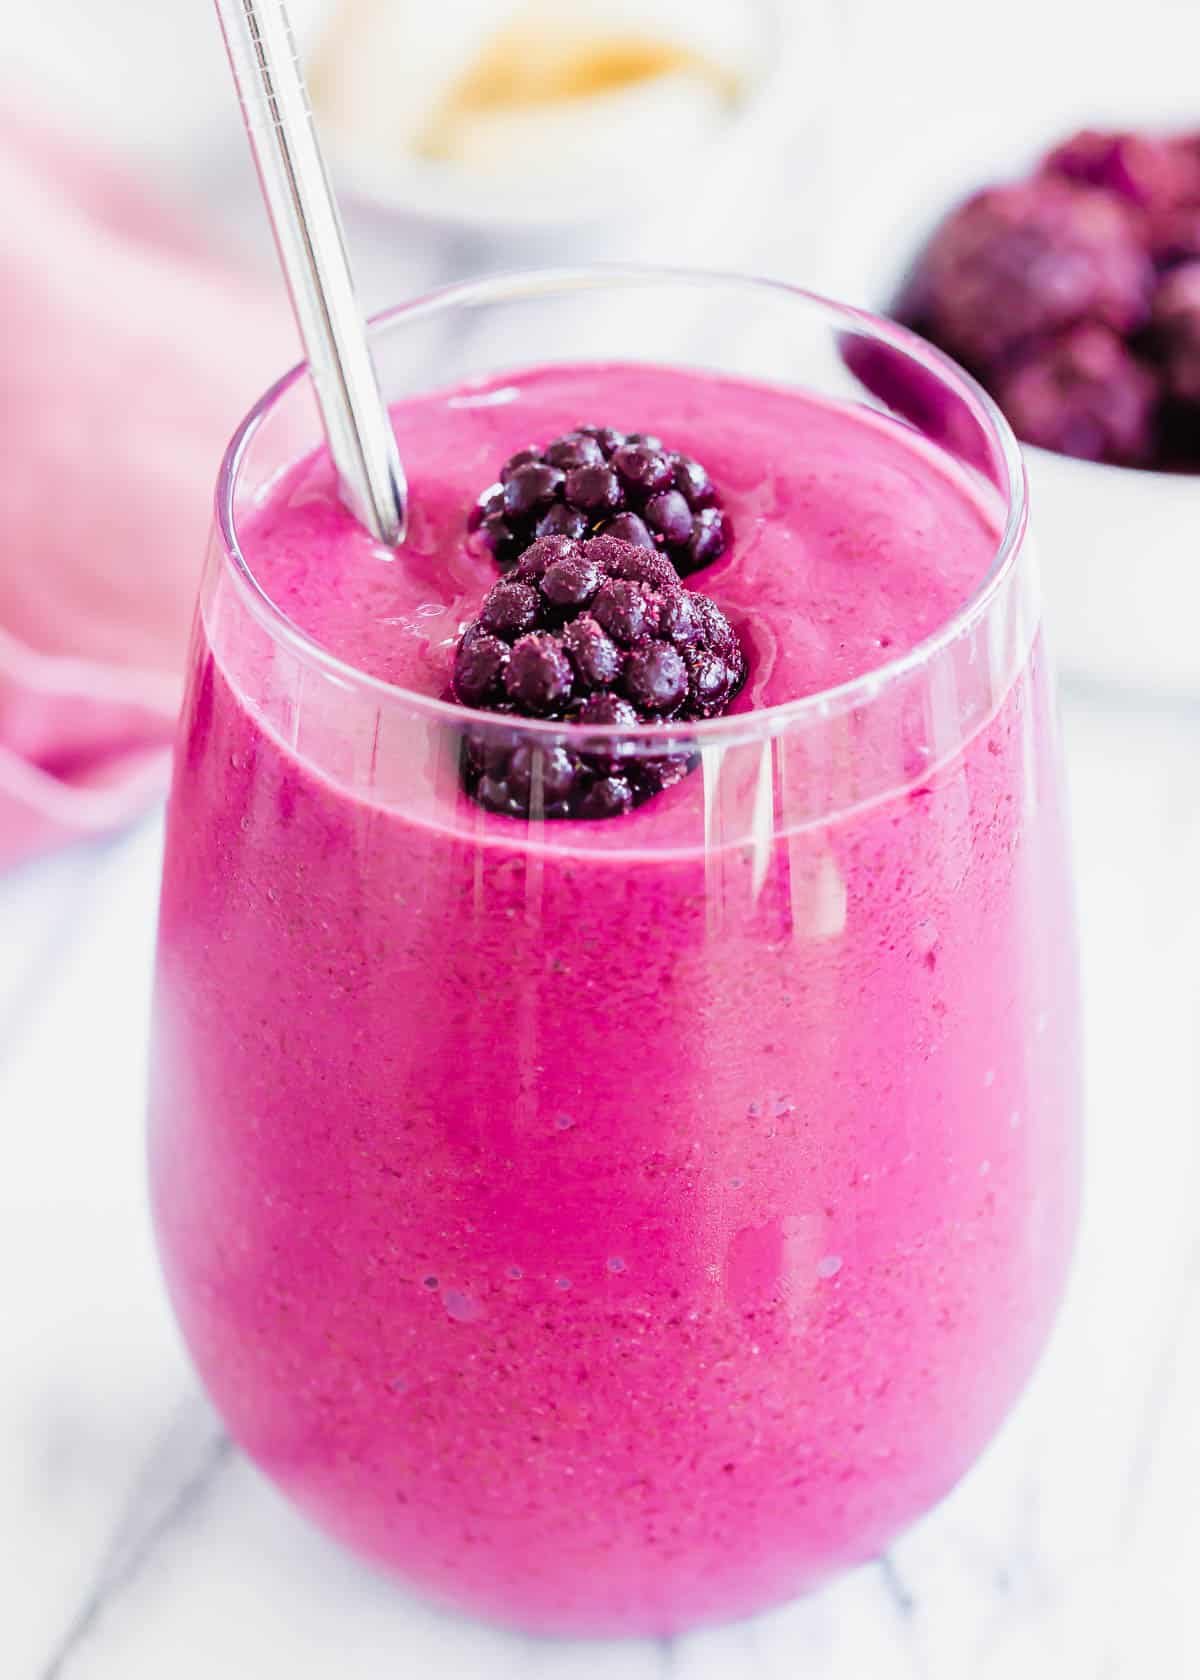 A smoothie with blackberries and bananas in a glass.